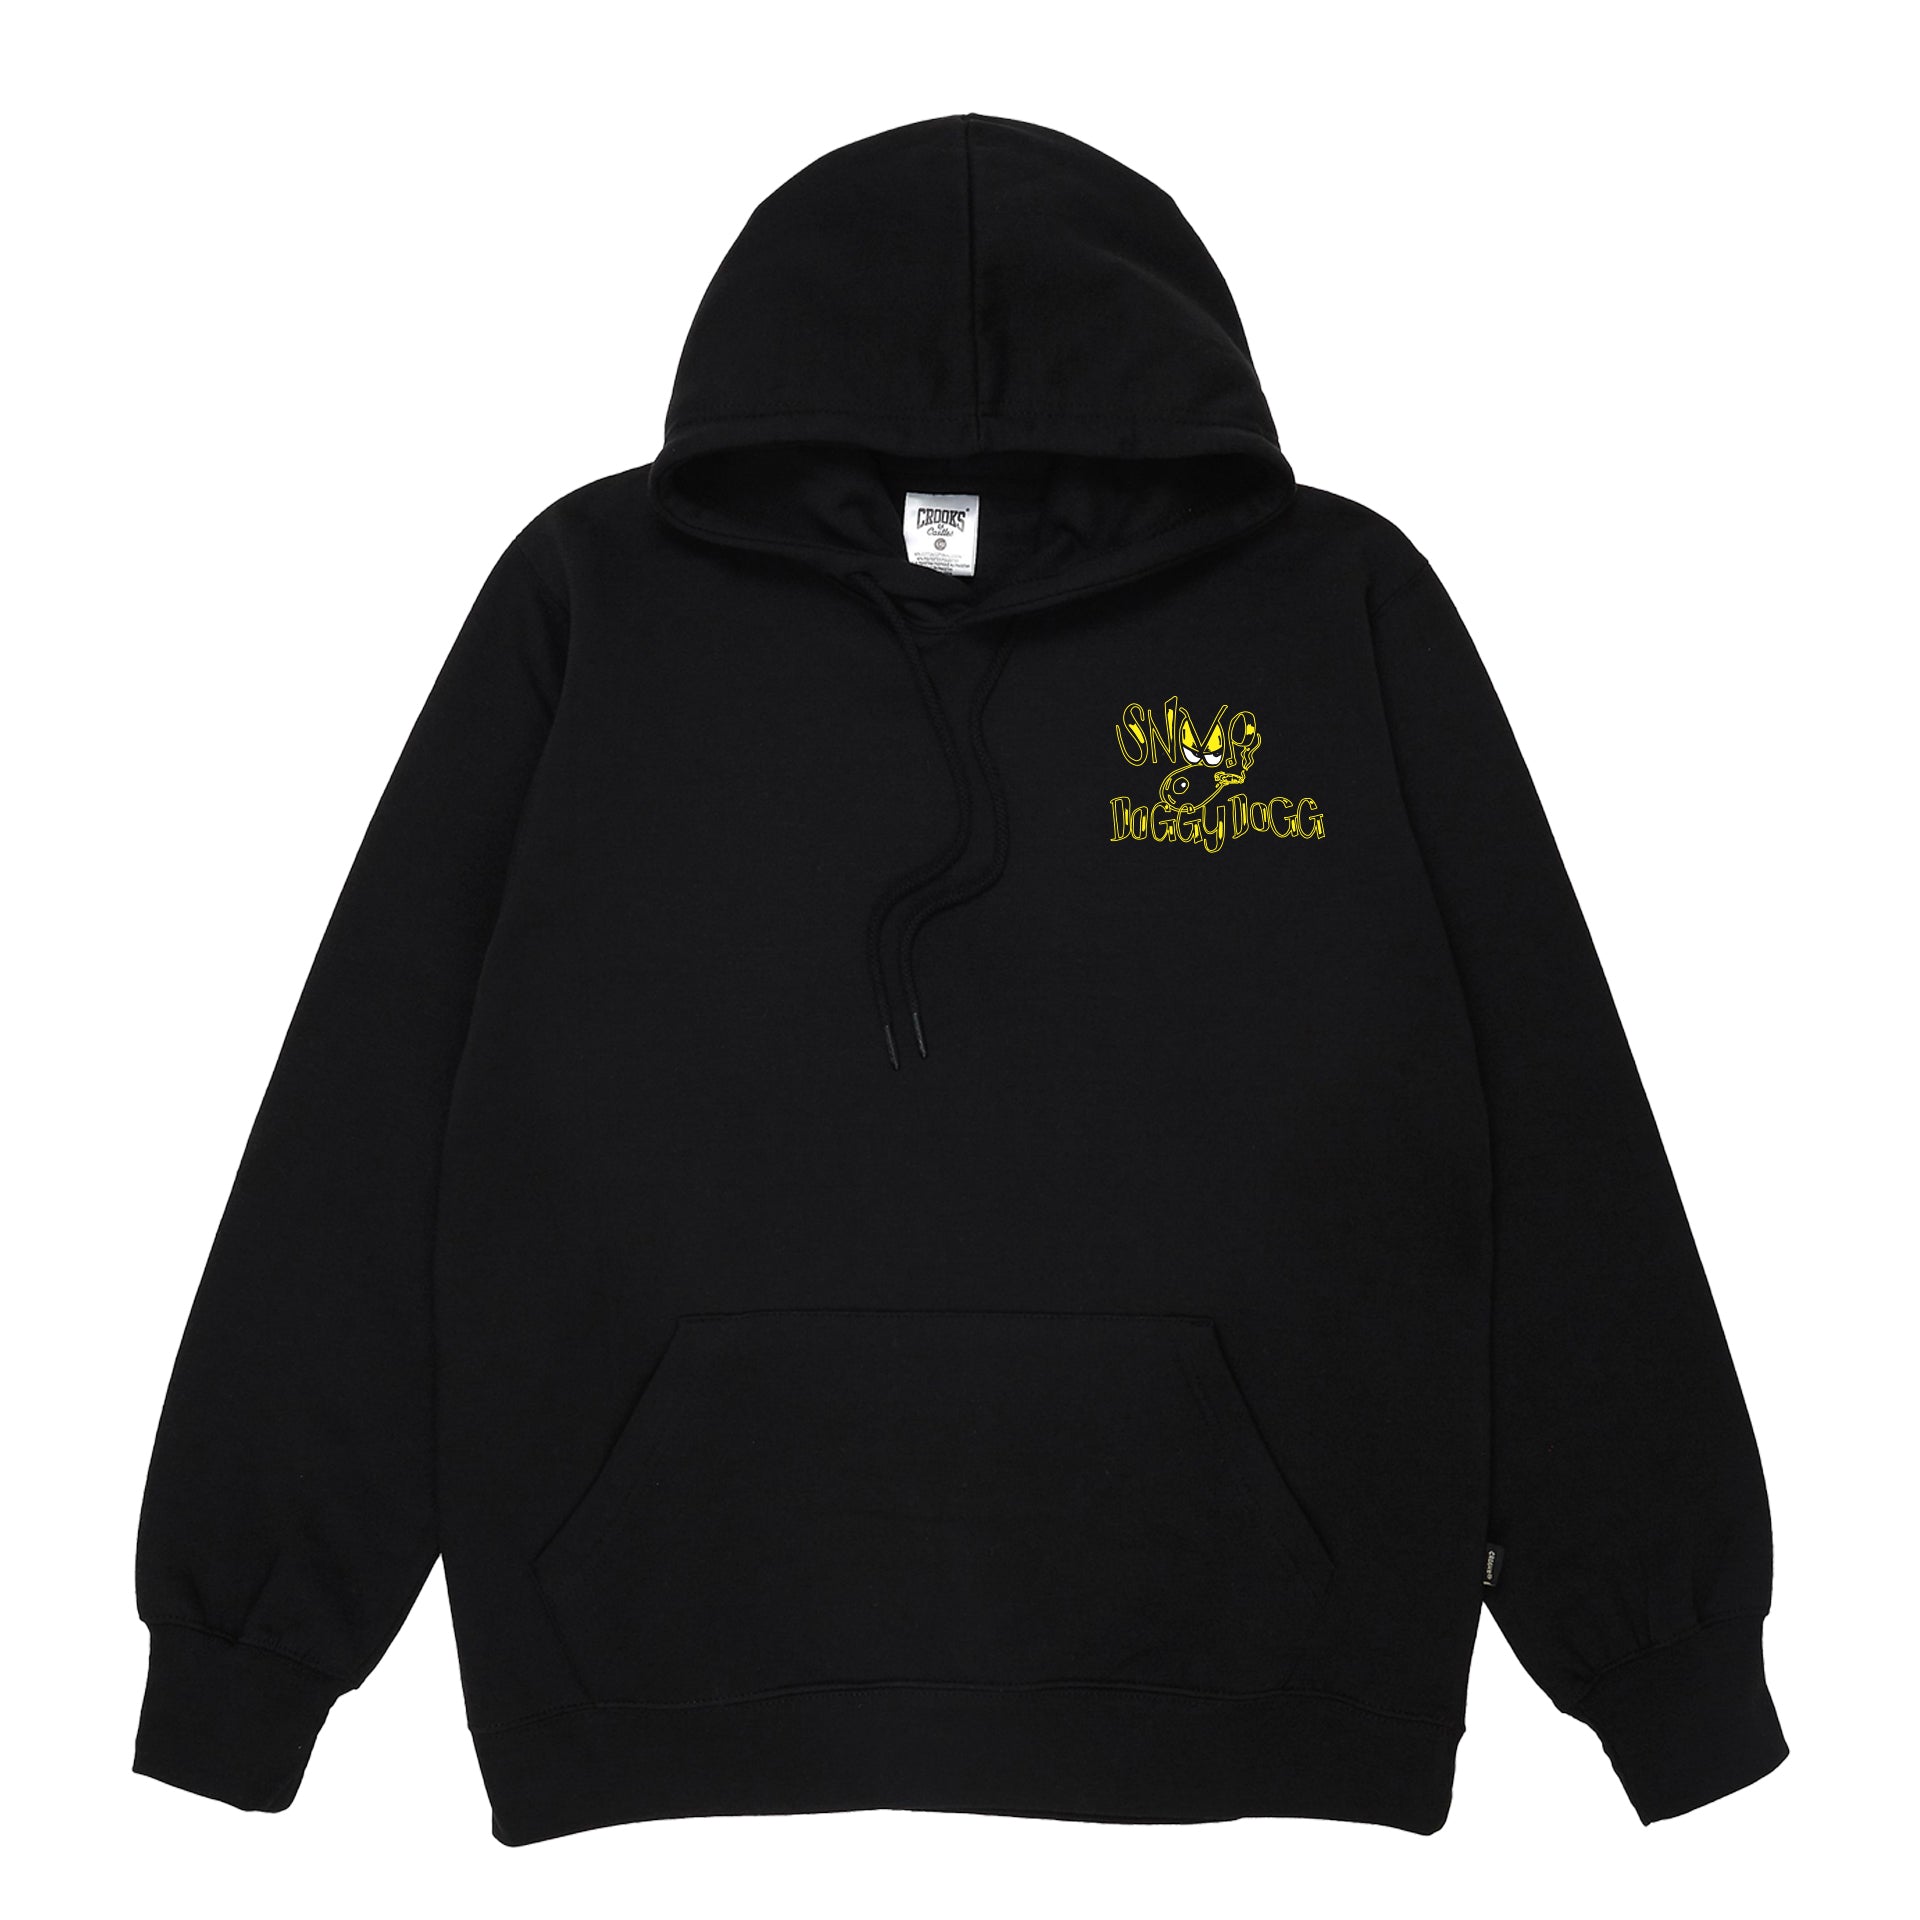 Doggystyle 30 Year Album Cover Hoodie